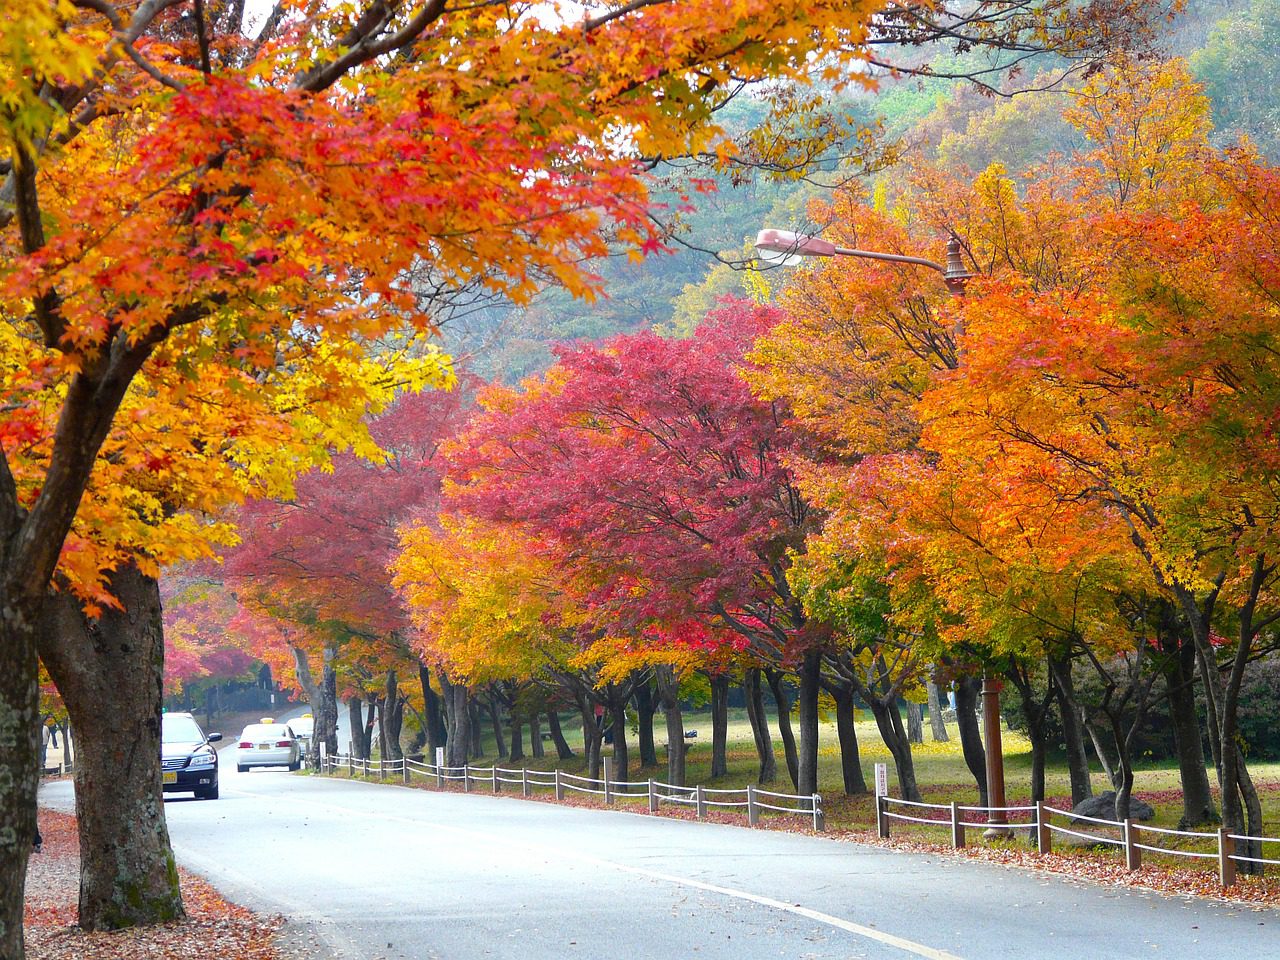 trees lining a road during autumn in seoul